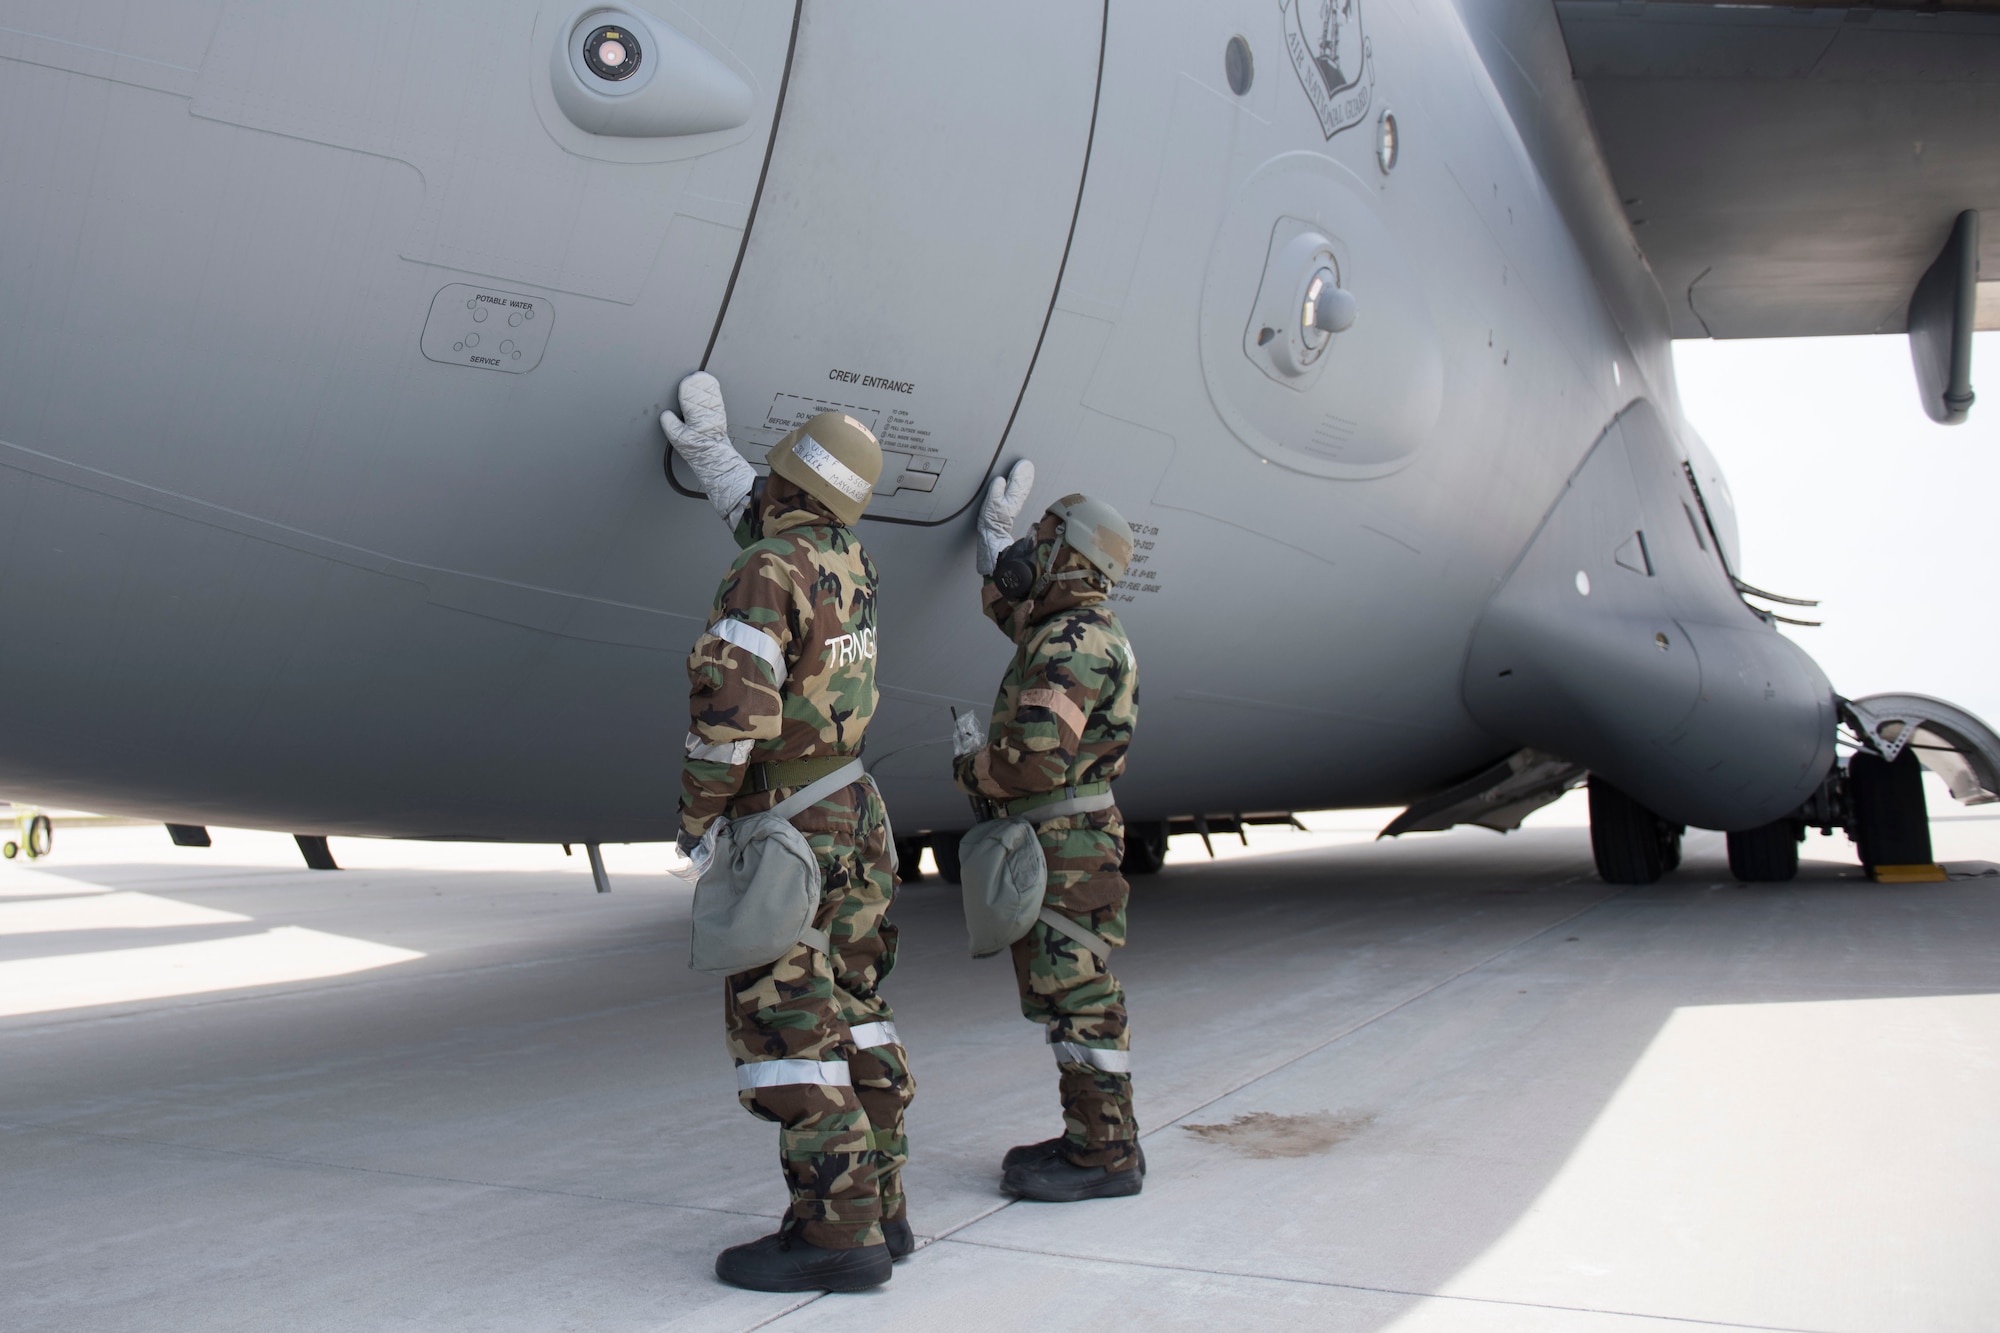 167th Airlift Wing aircraft maintainers simulate decontaminating a crew entrance door on a C-17 aircraft during a training exercise at Alpena Combat Readiness Training Center, Alpena, Mich., May 8, 2019. Approximately 300 167th AW Airmen participated in the training event. (U.S. Air National Guard photo by Tech. Sgt. Jodie Witmer)